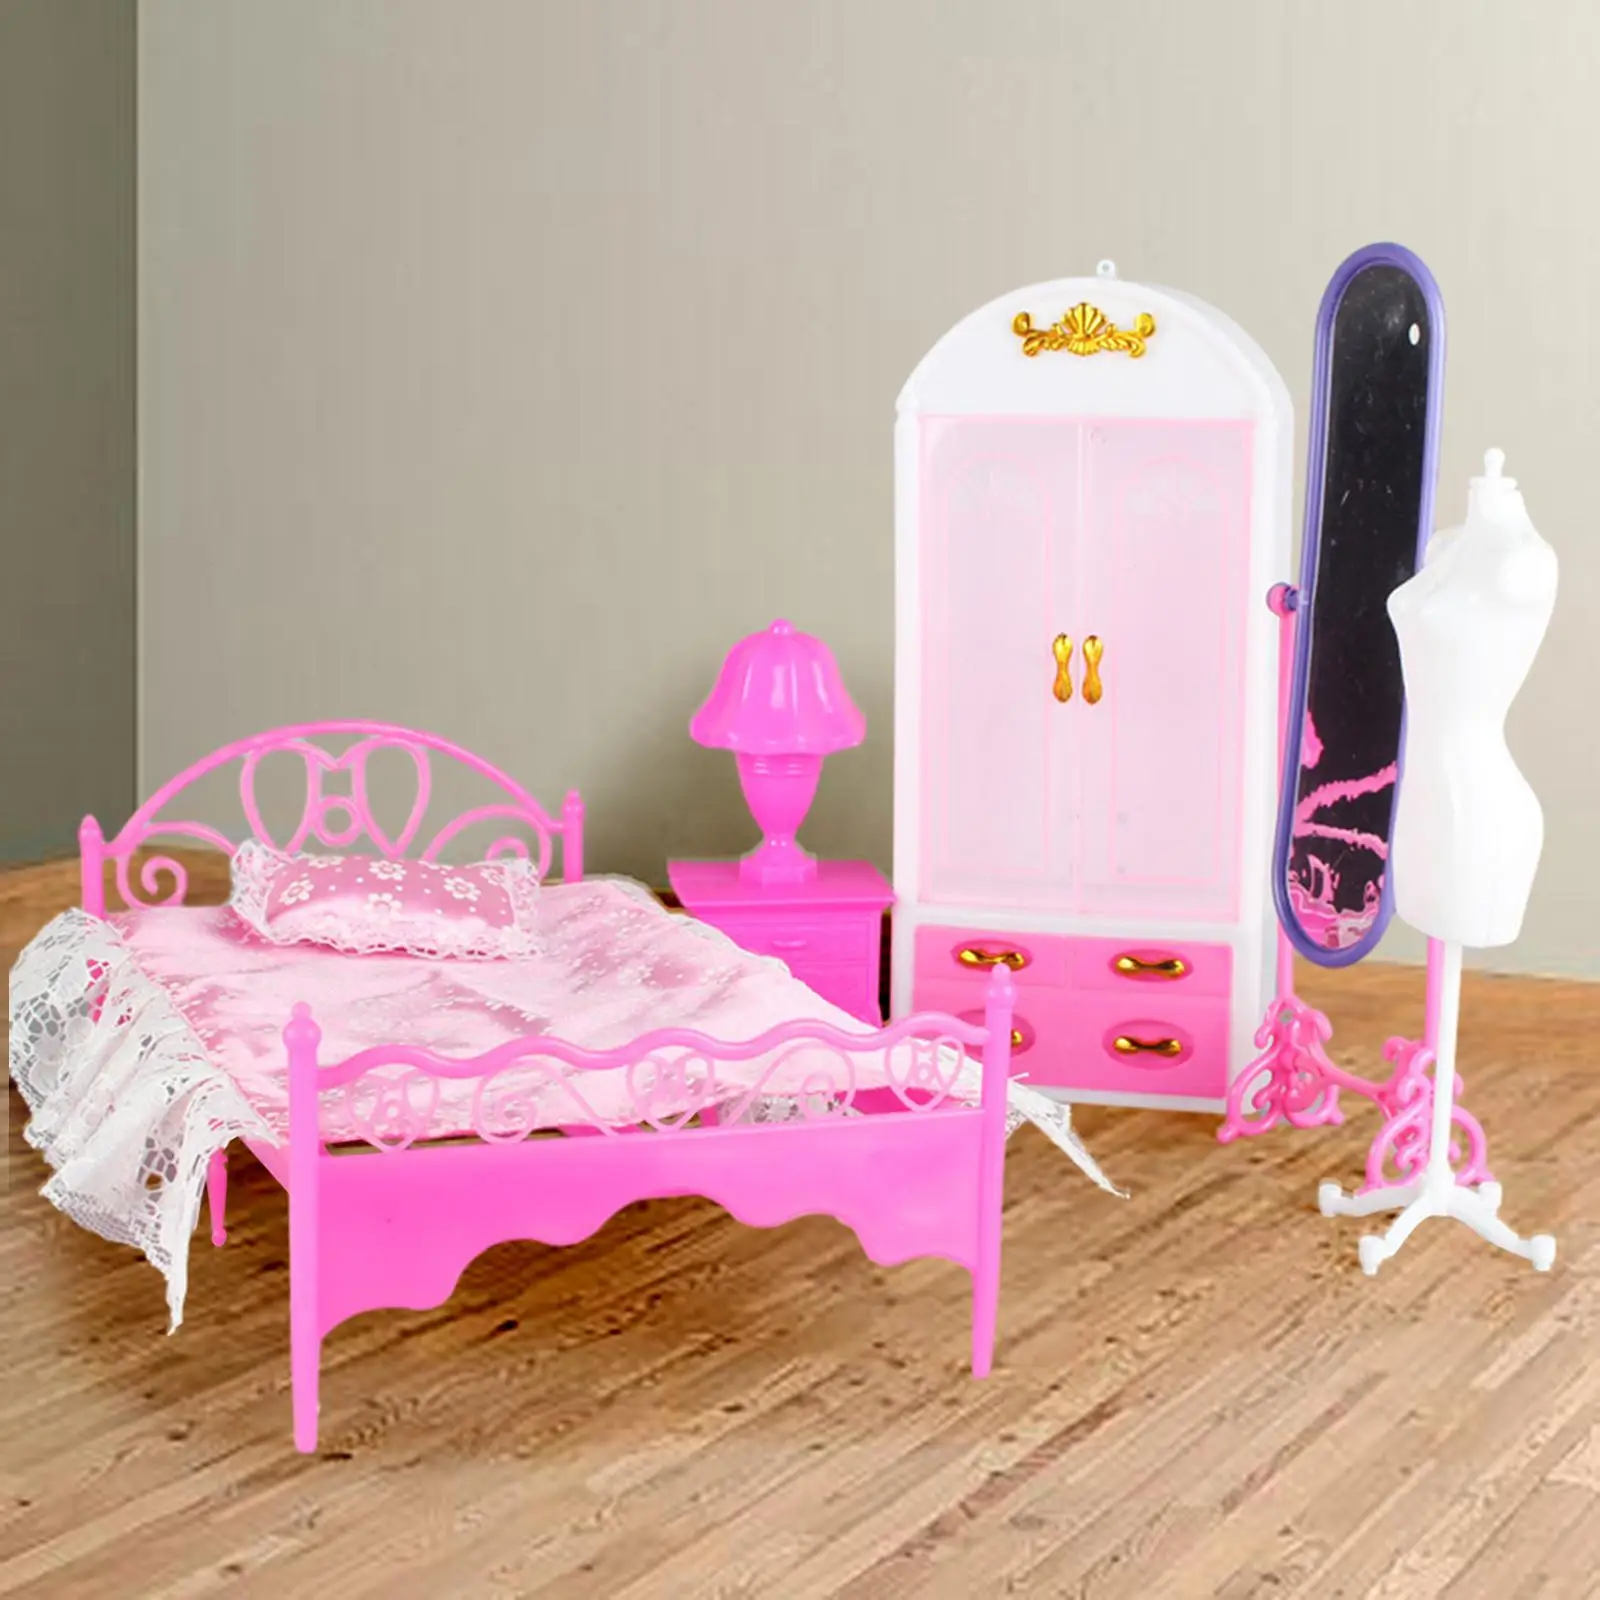 5x 1:6 Doll Furniture Accessories Pretend Play Mini Model Micro Landscape Mannequin Stand for Living Room Home Bedroom Ornaments